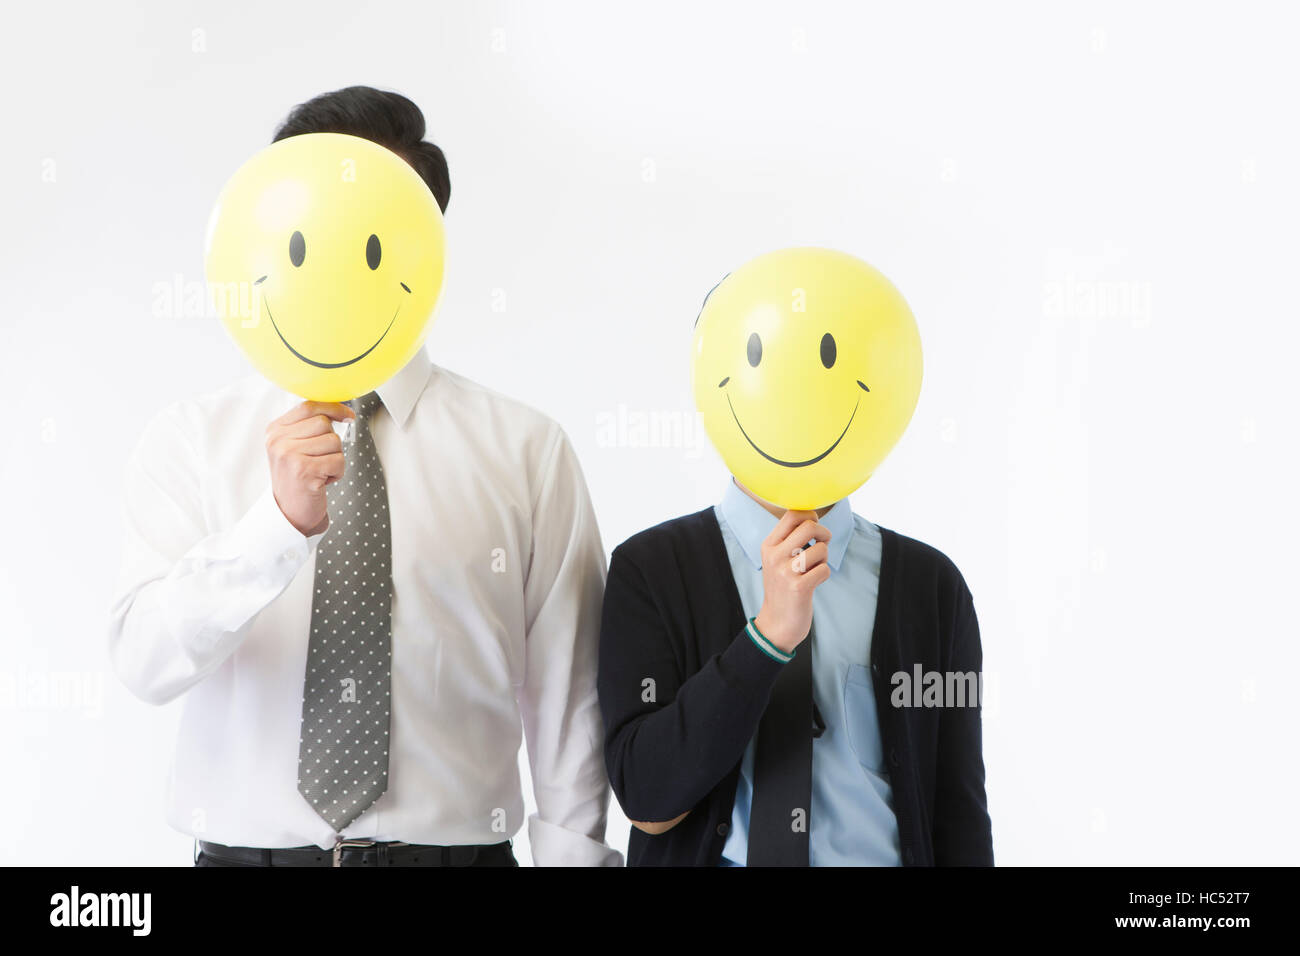 Father and son with balloons of smiling faces Stock Photo